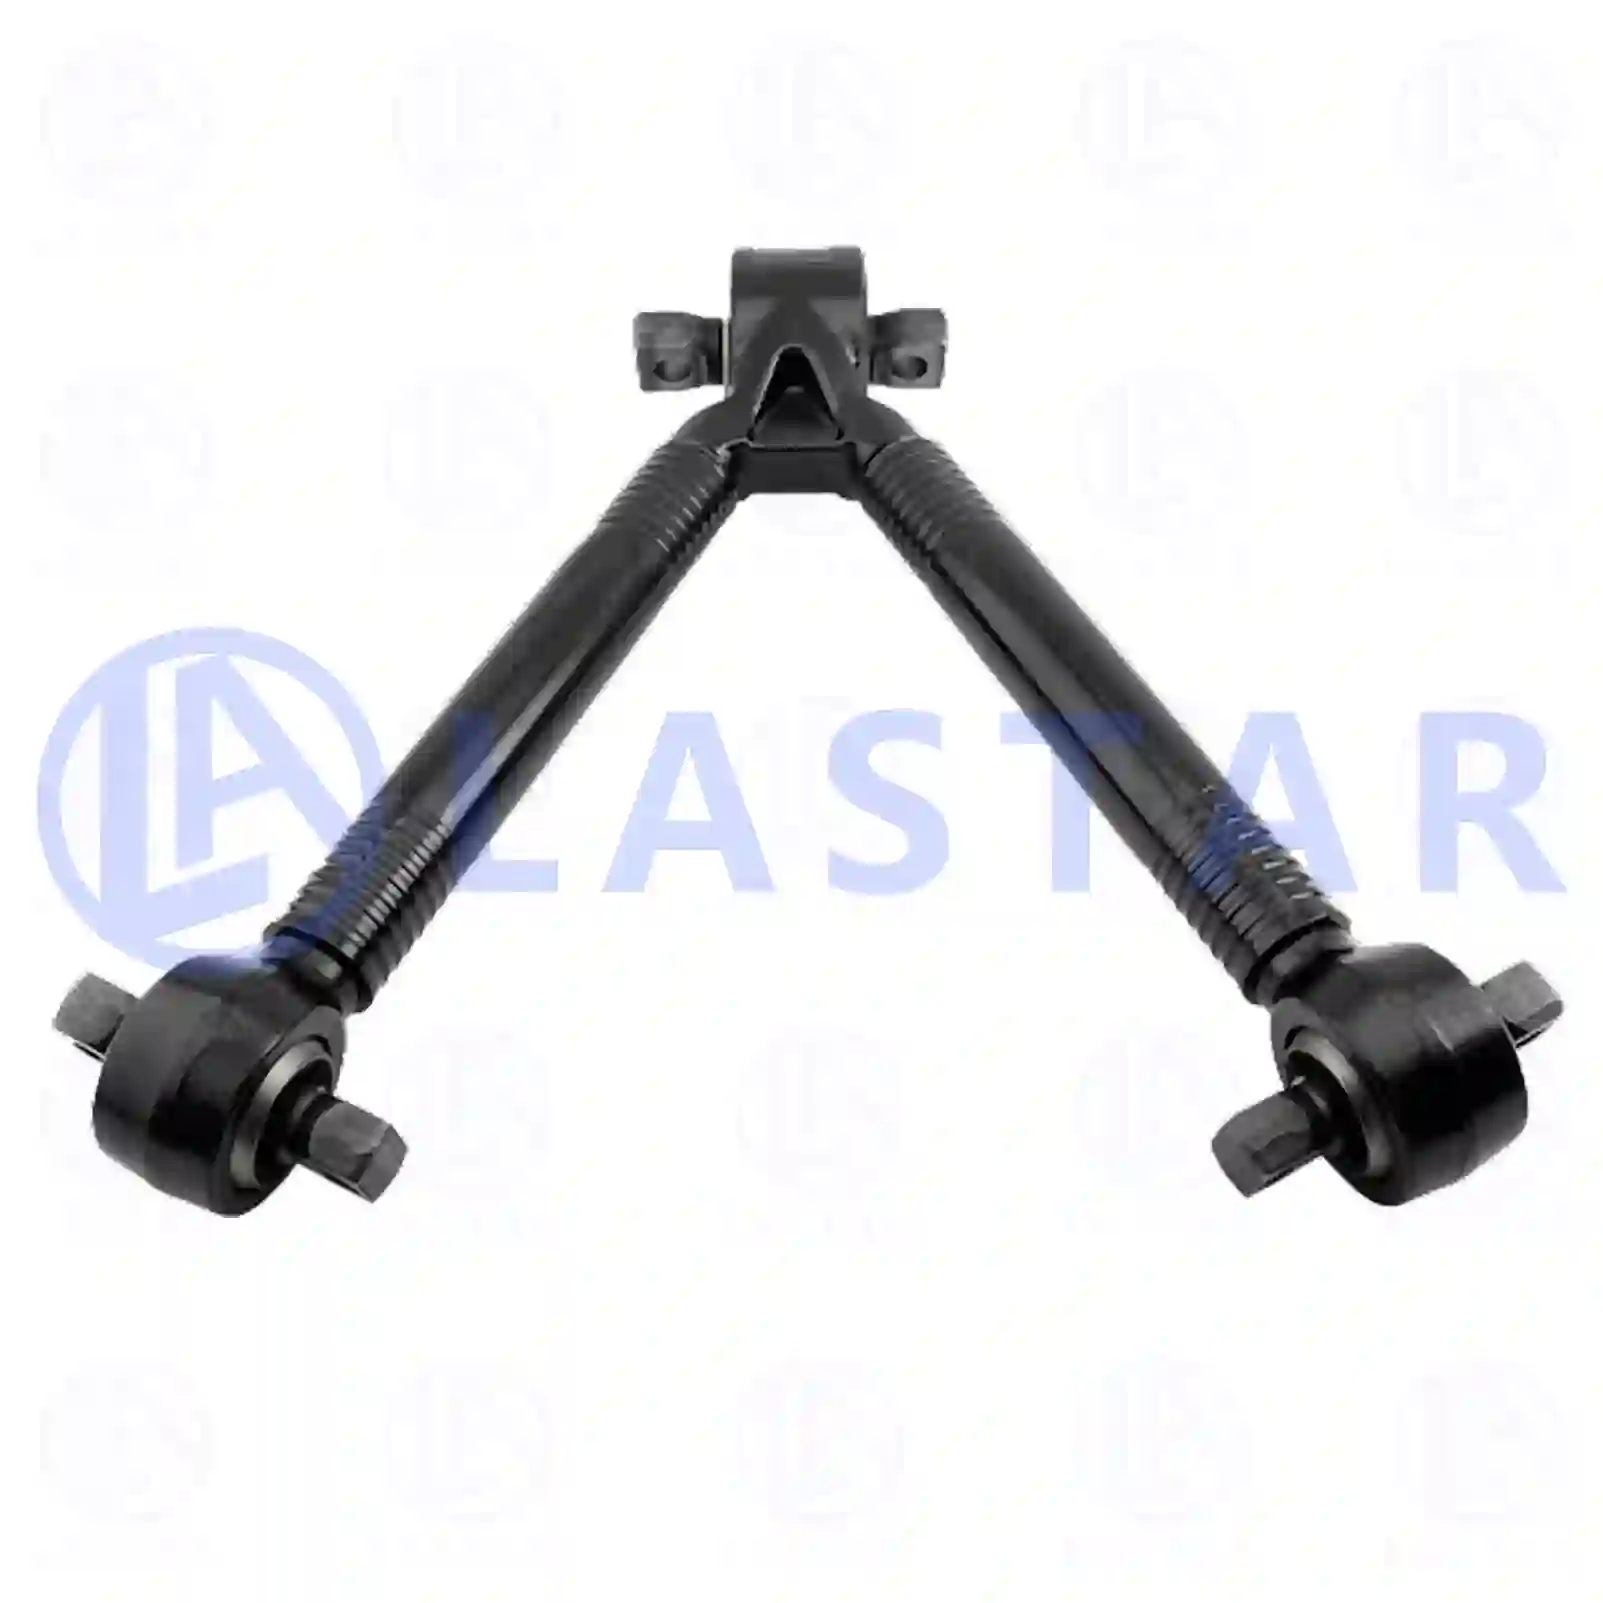 V-stay, 77727430, 9483500905, 9483502305, ||  77727430 Lastar Spare Part | Truck Spare Parts, Auotomotive Spare Parts V-stay, 77727430, 9483500905, 9483502305, ||  77727430 Lastar Spare Part | Truck Spare Parts, Auotomotive Spare Parts